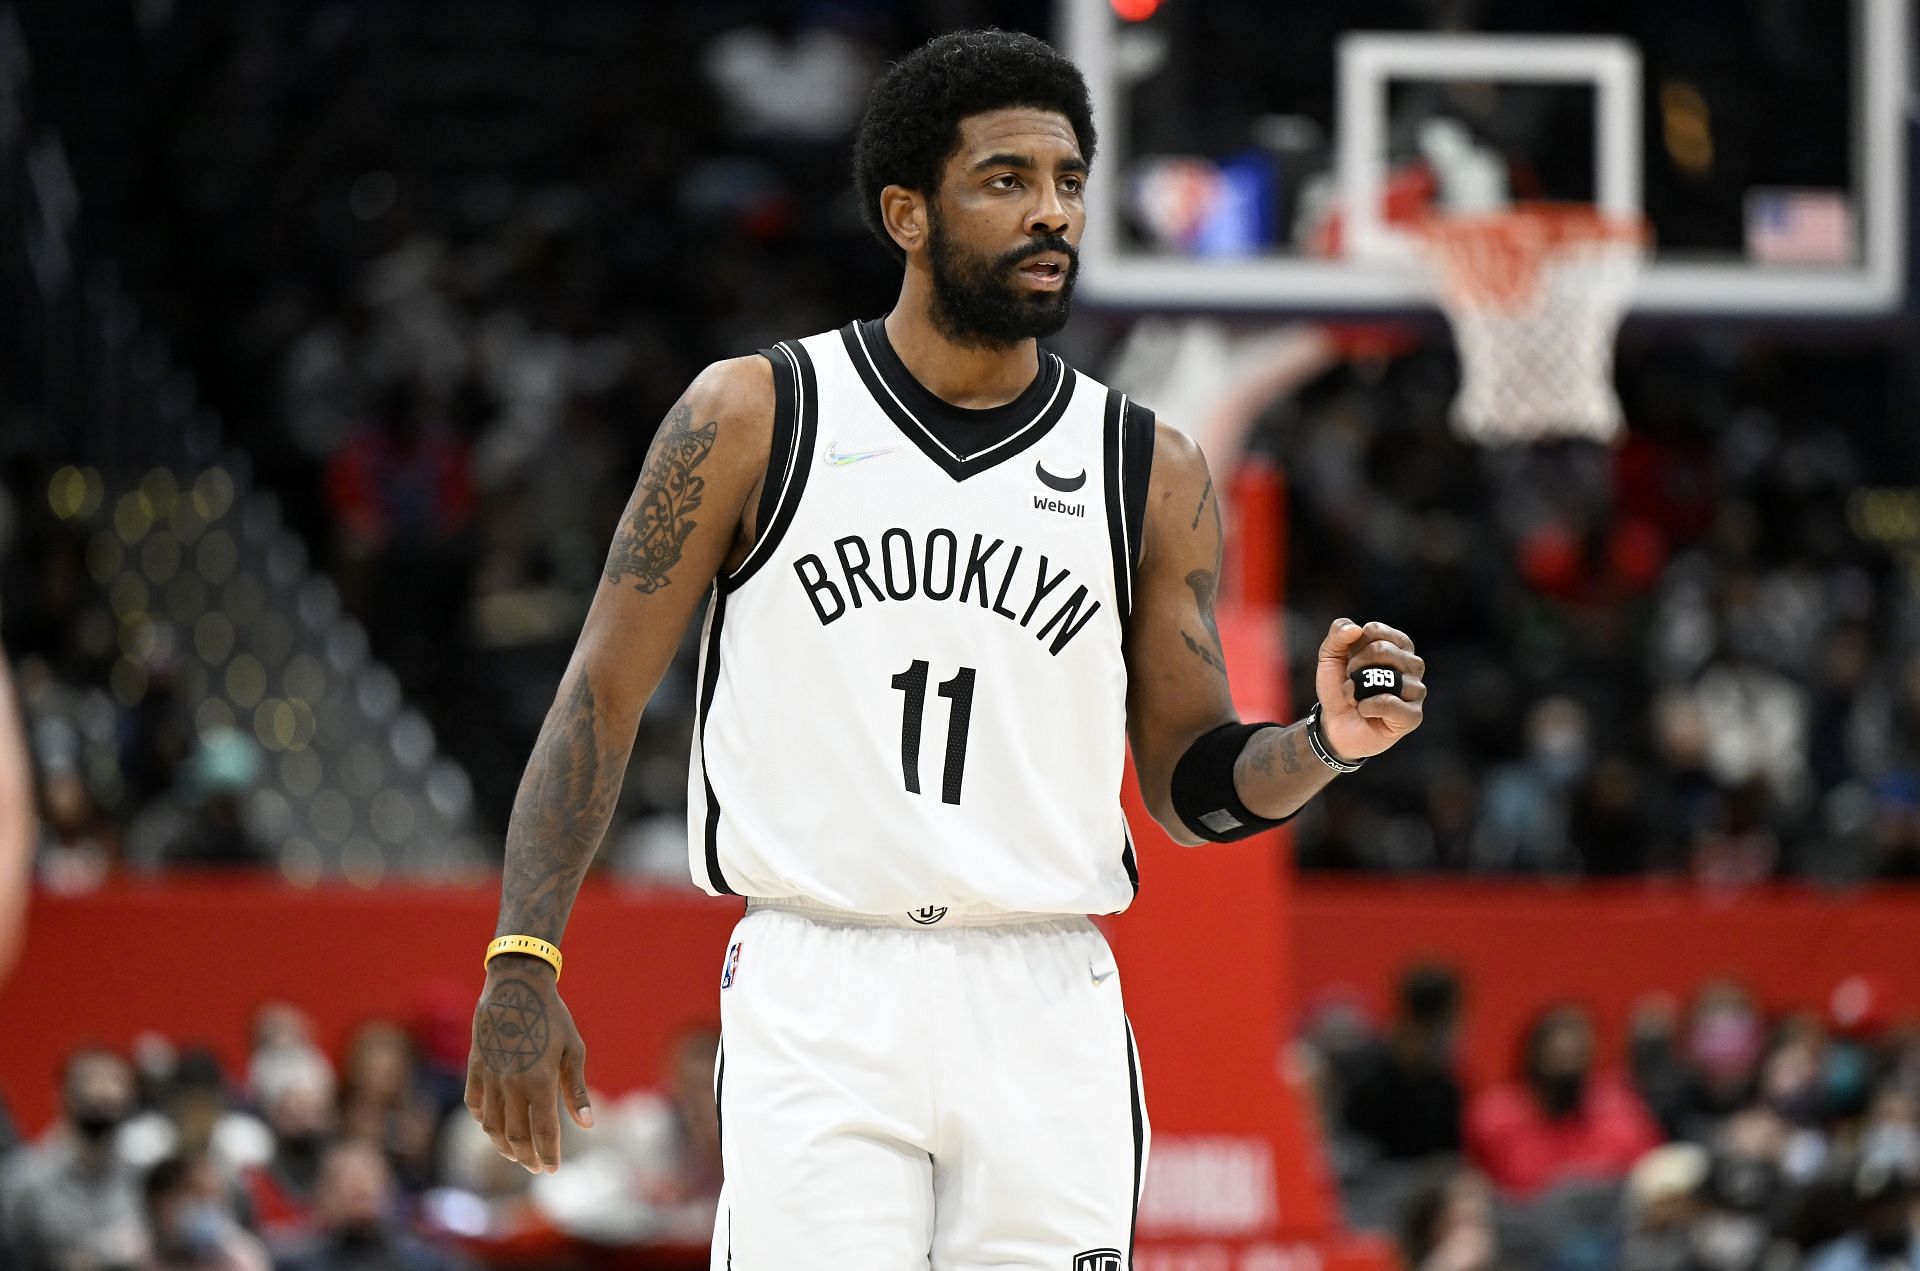 Kyrie Irving of the Brooklyn Nets against the Washington Wizards.